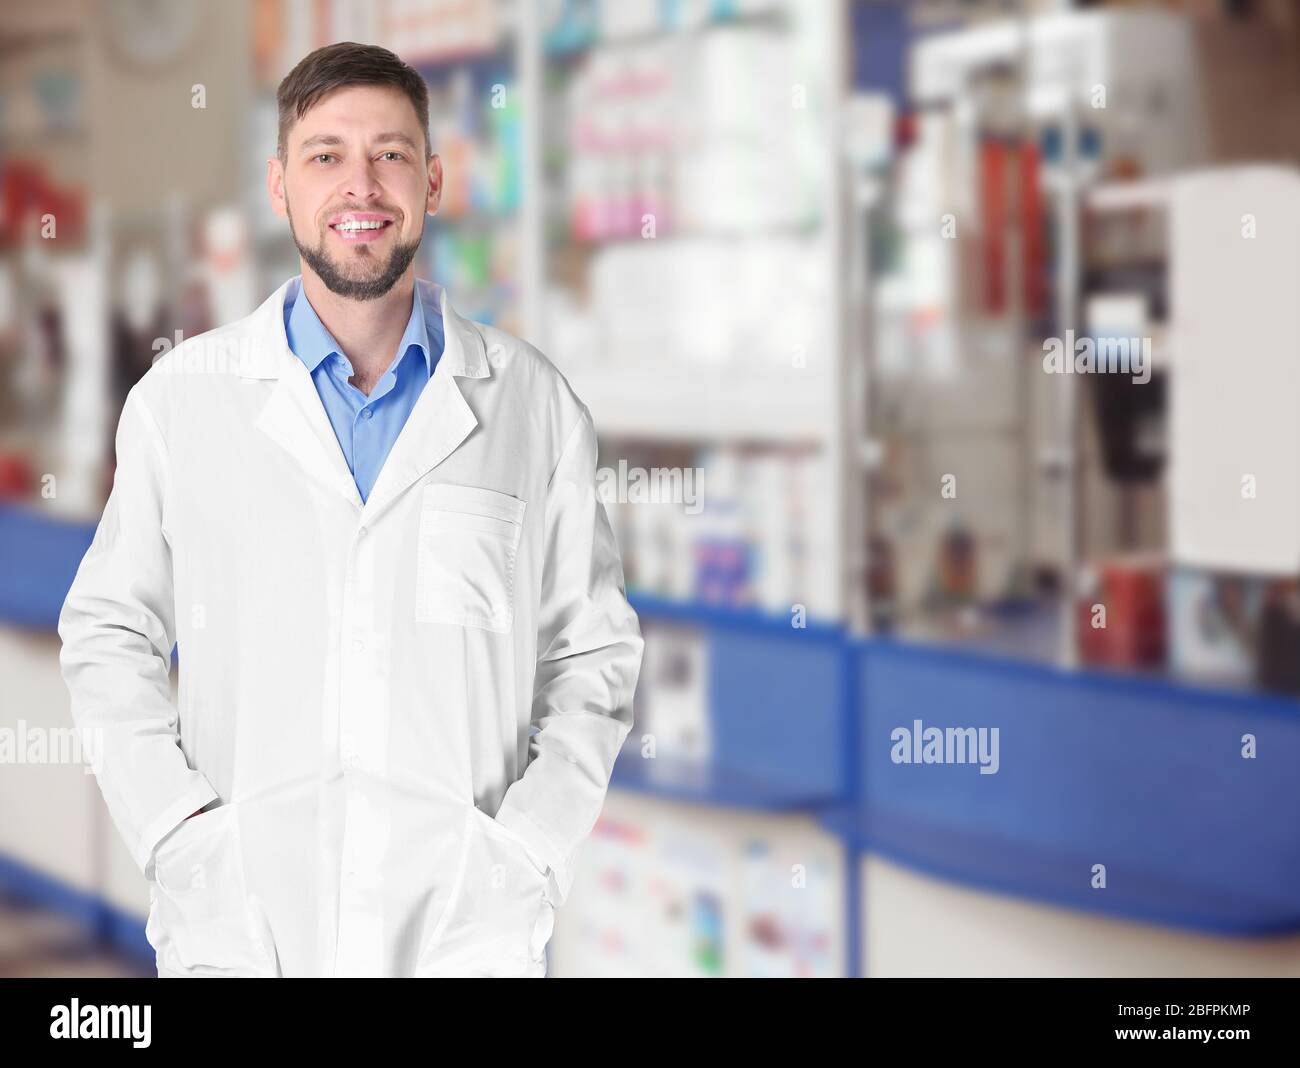 Male pharmacist at work. Blurred shelves with pharmaceutical products on background Stock Photo